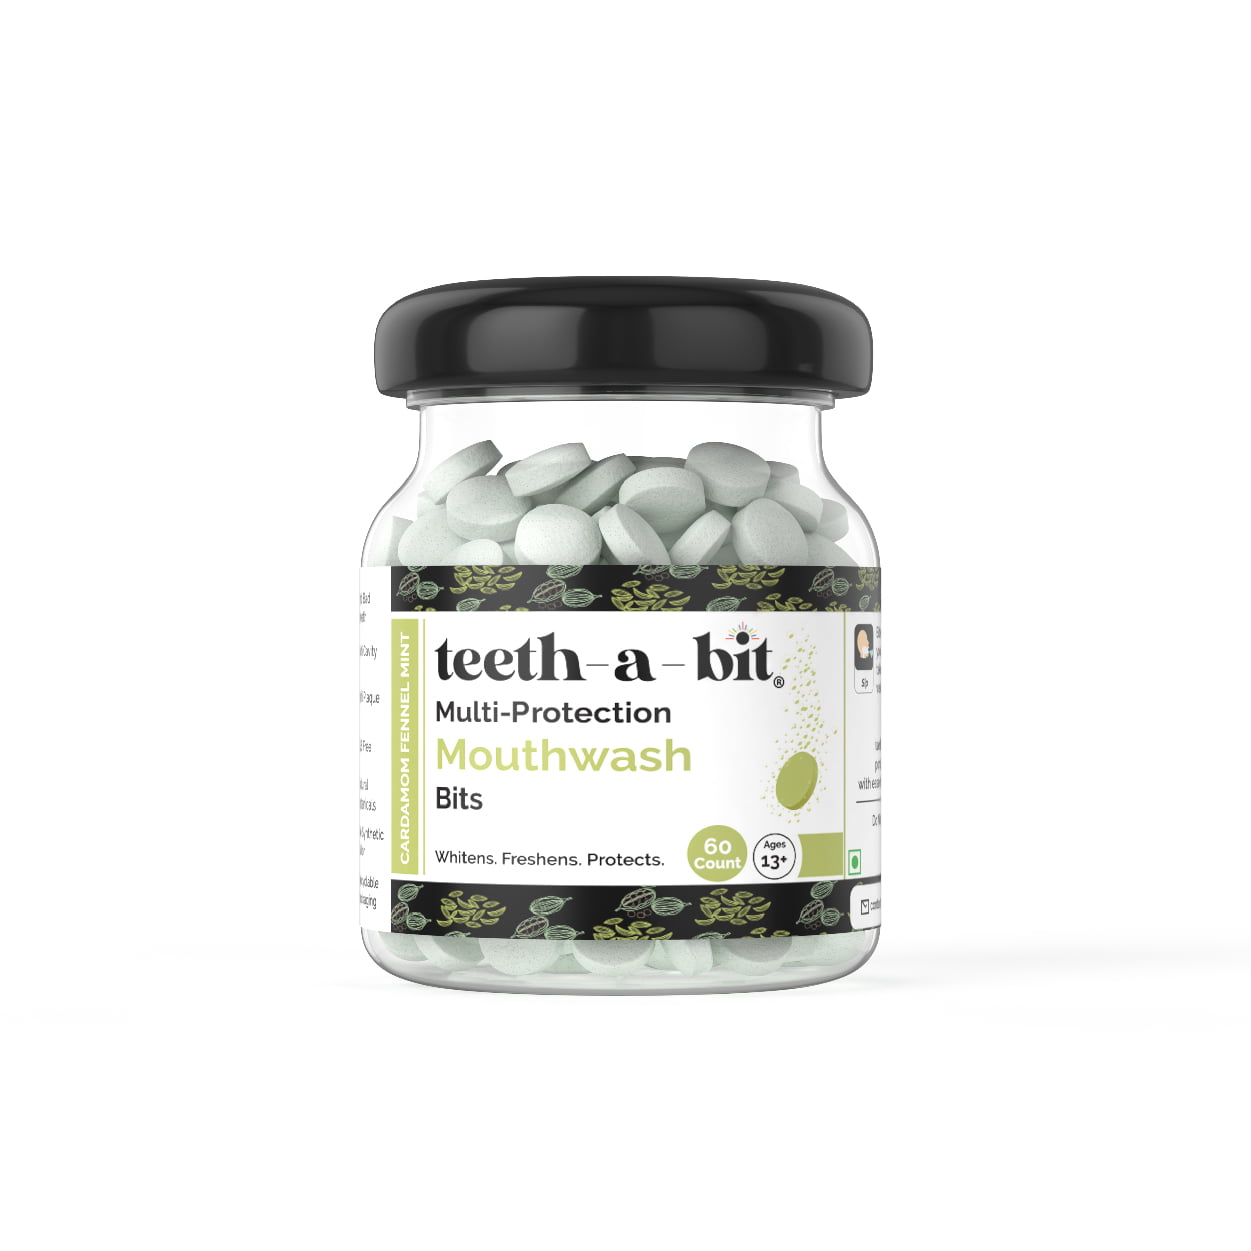 teeth-a-bit Multiprotection Cardamom Fennel Mint Mouthwash Bits |Equal to 1200ml of liquid mouthwash (60 Count)